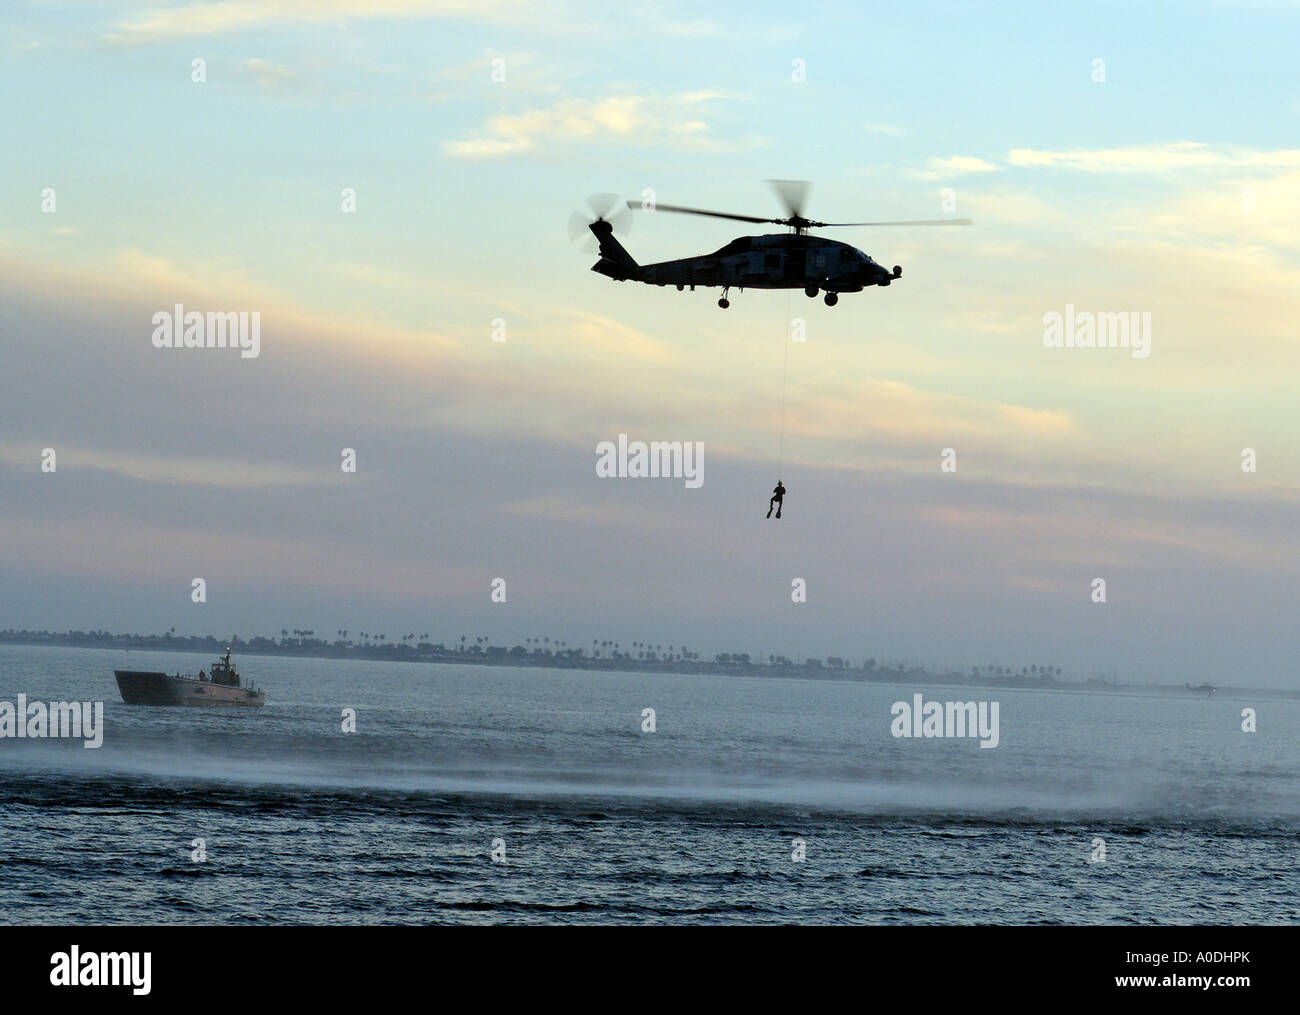 A Landscape Photograph of a Military Exercise Being Undertaken in San Diego, California Stock Photo